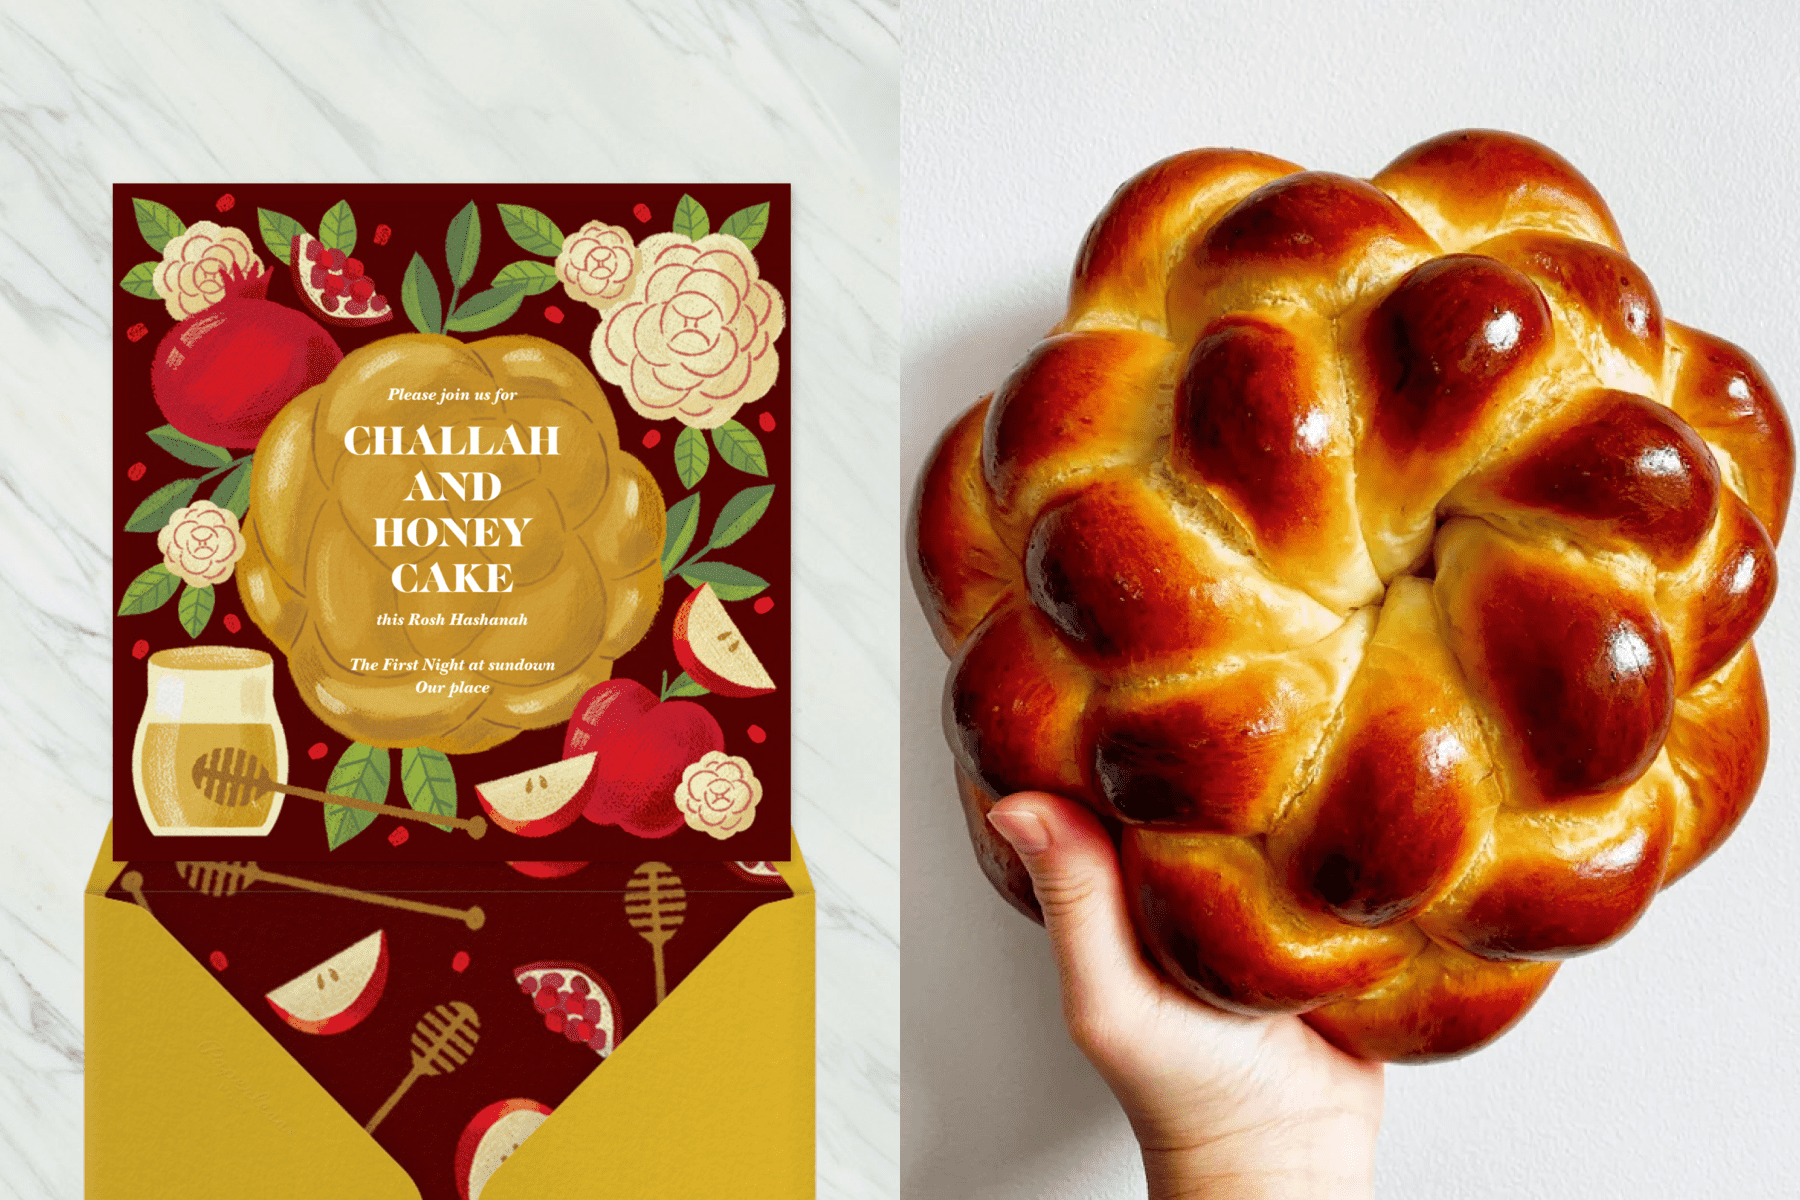 Left: A Rosh Hashanah invitation with round challah at the center surrounded by apples, pomegranates, and honey. Right: A hand holding a round challah bread.